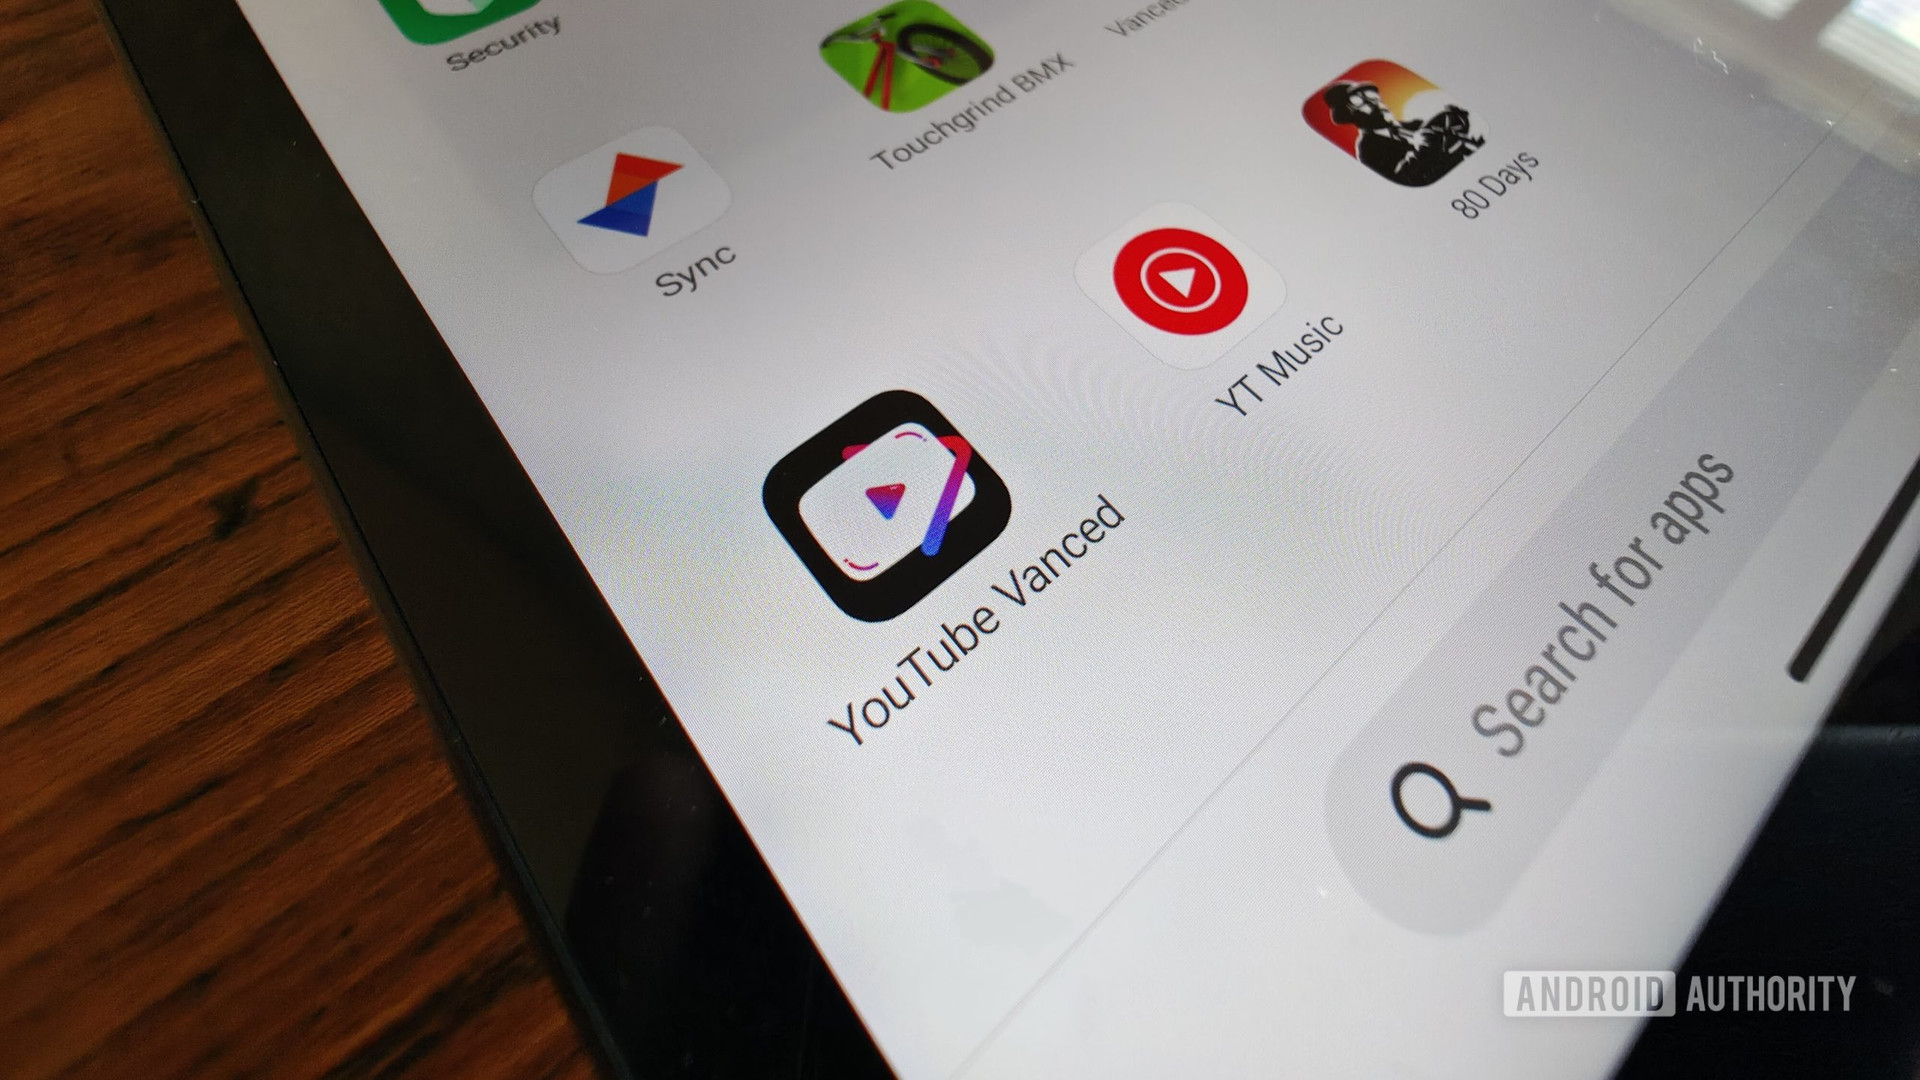 The excellent YouTube Vanced app has been discontinued